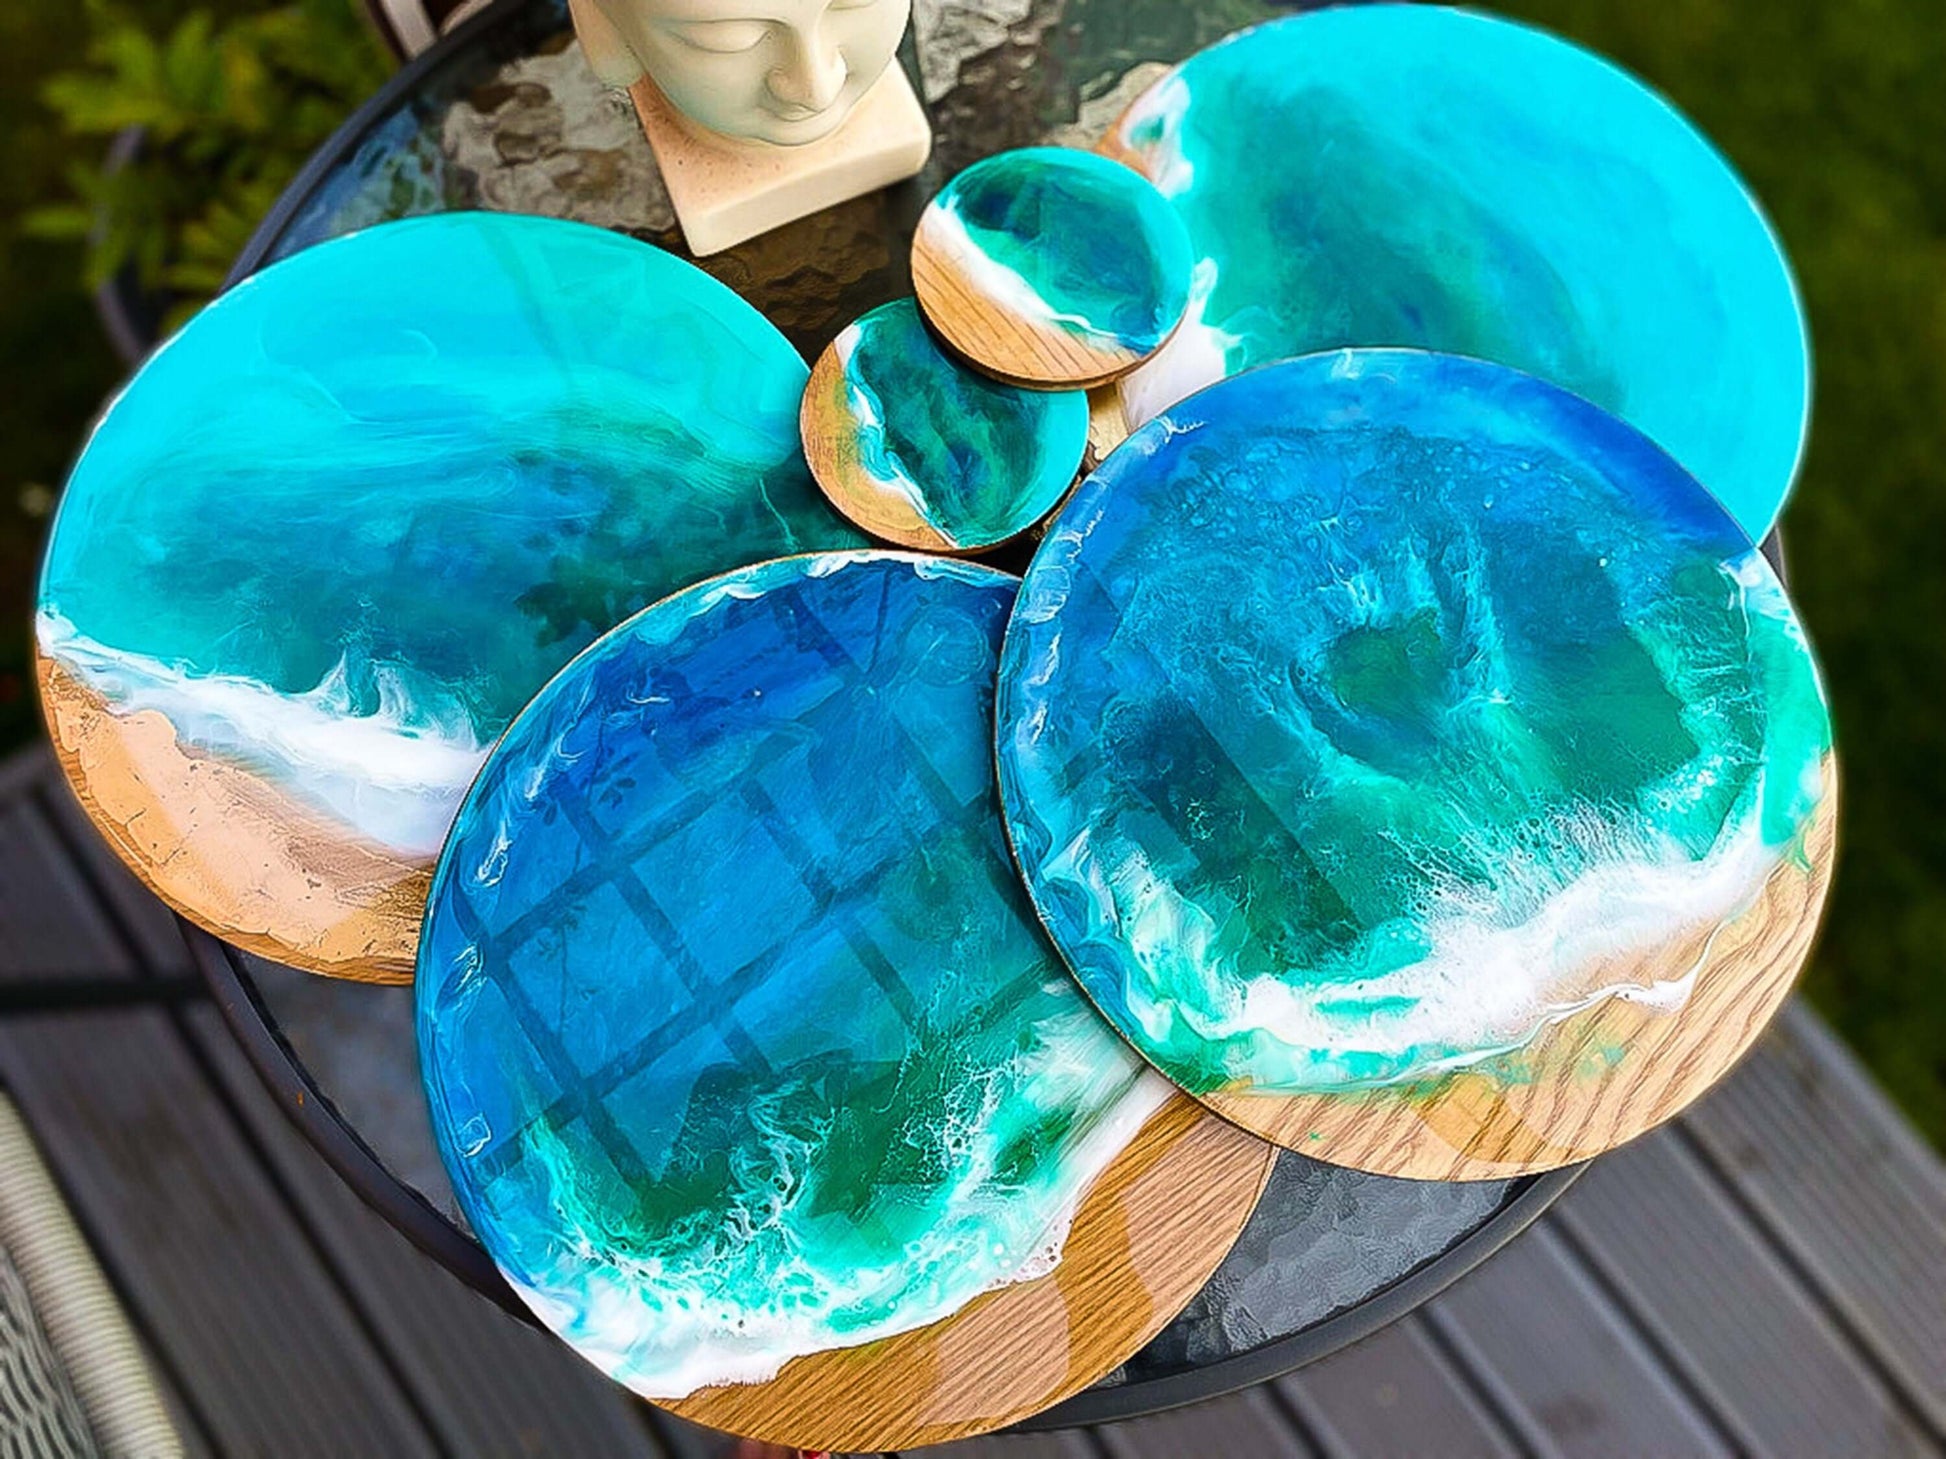 Aveco Creative Epoxy Transparent Gradient Blue Bamboo Round Tea Resin Wood  Coasters for Tea Ceremony Accessories - China Coaster and Teacup Mat price